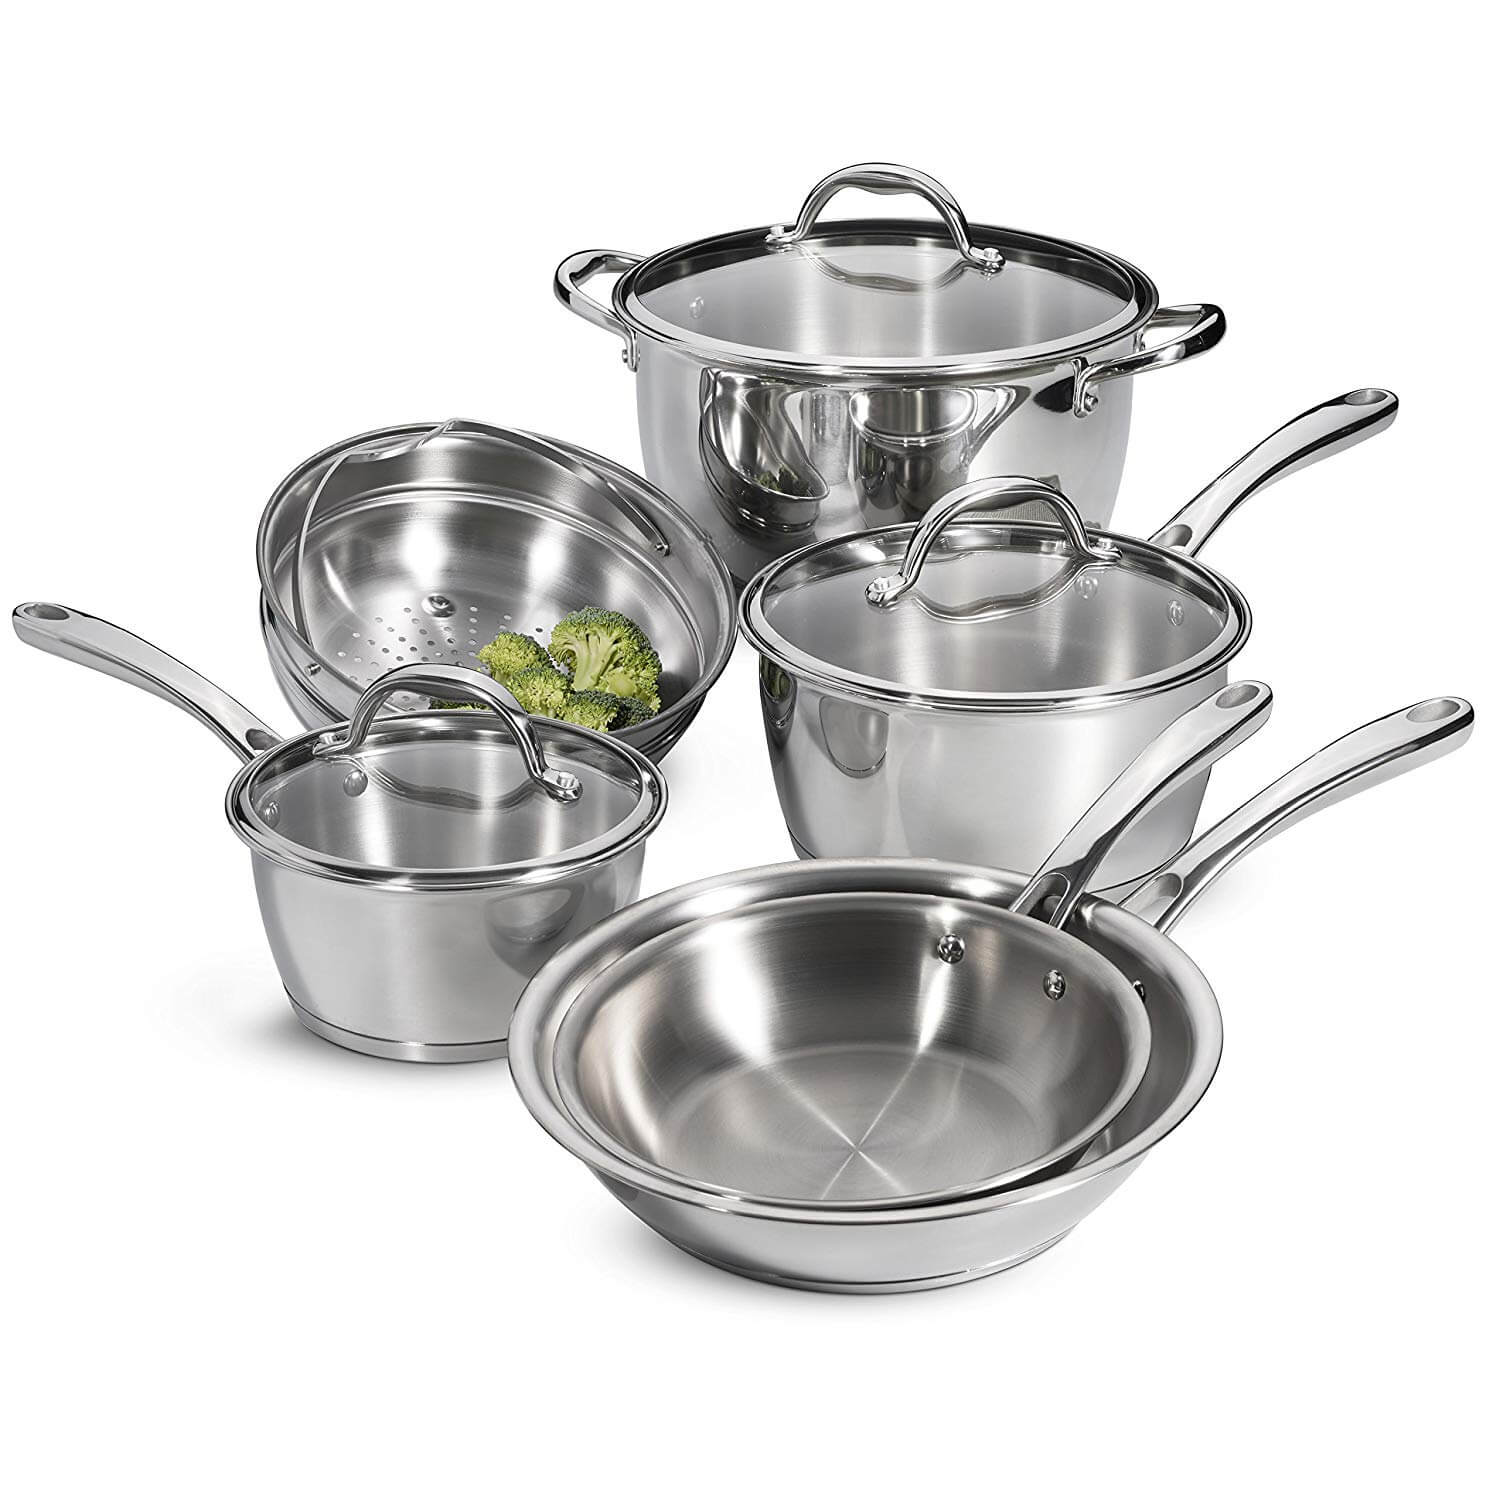 Tramontina 80154 567DS 9 Piece Stainless Steel Tri-Ply Base Cookware Set